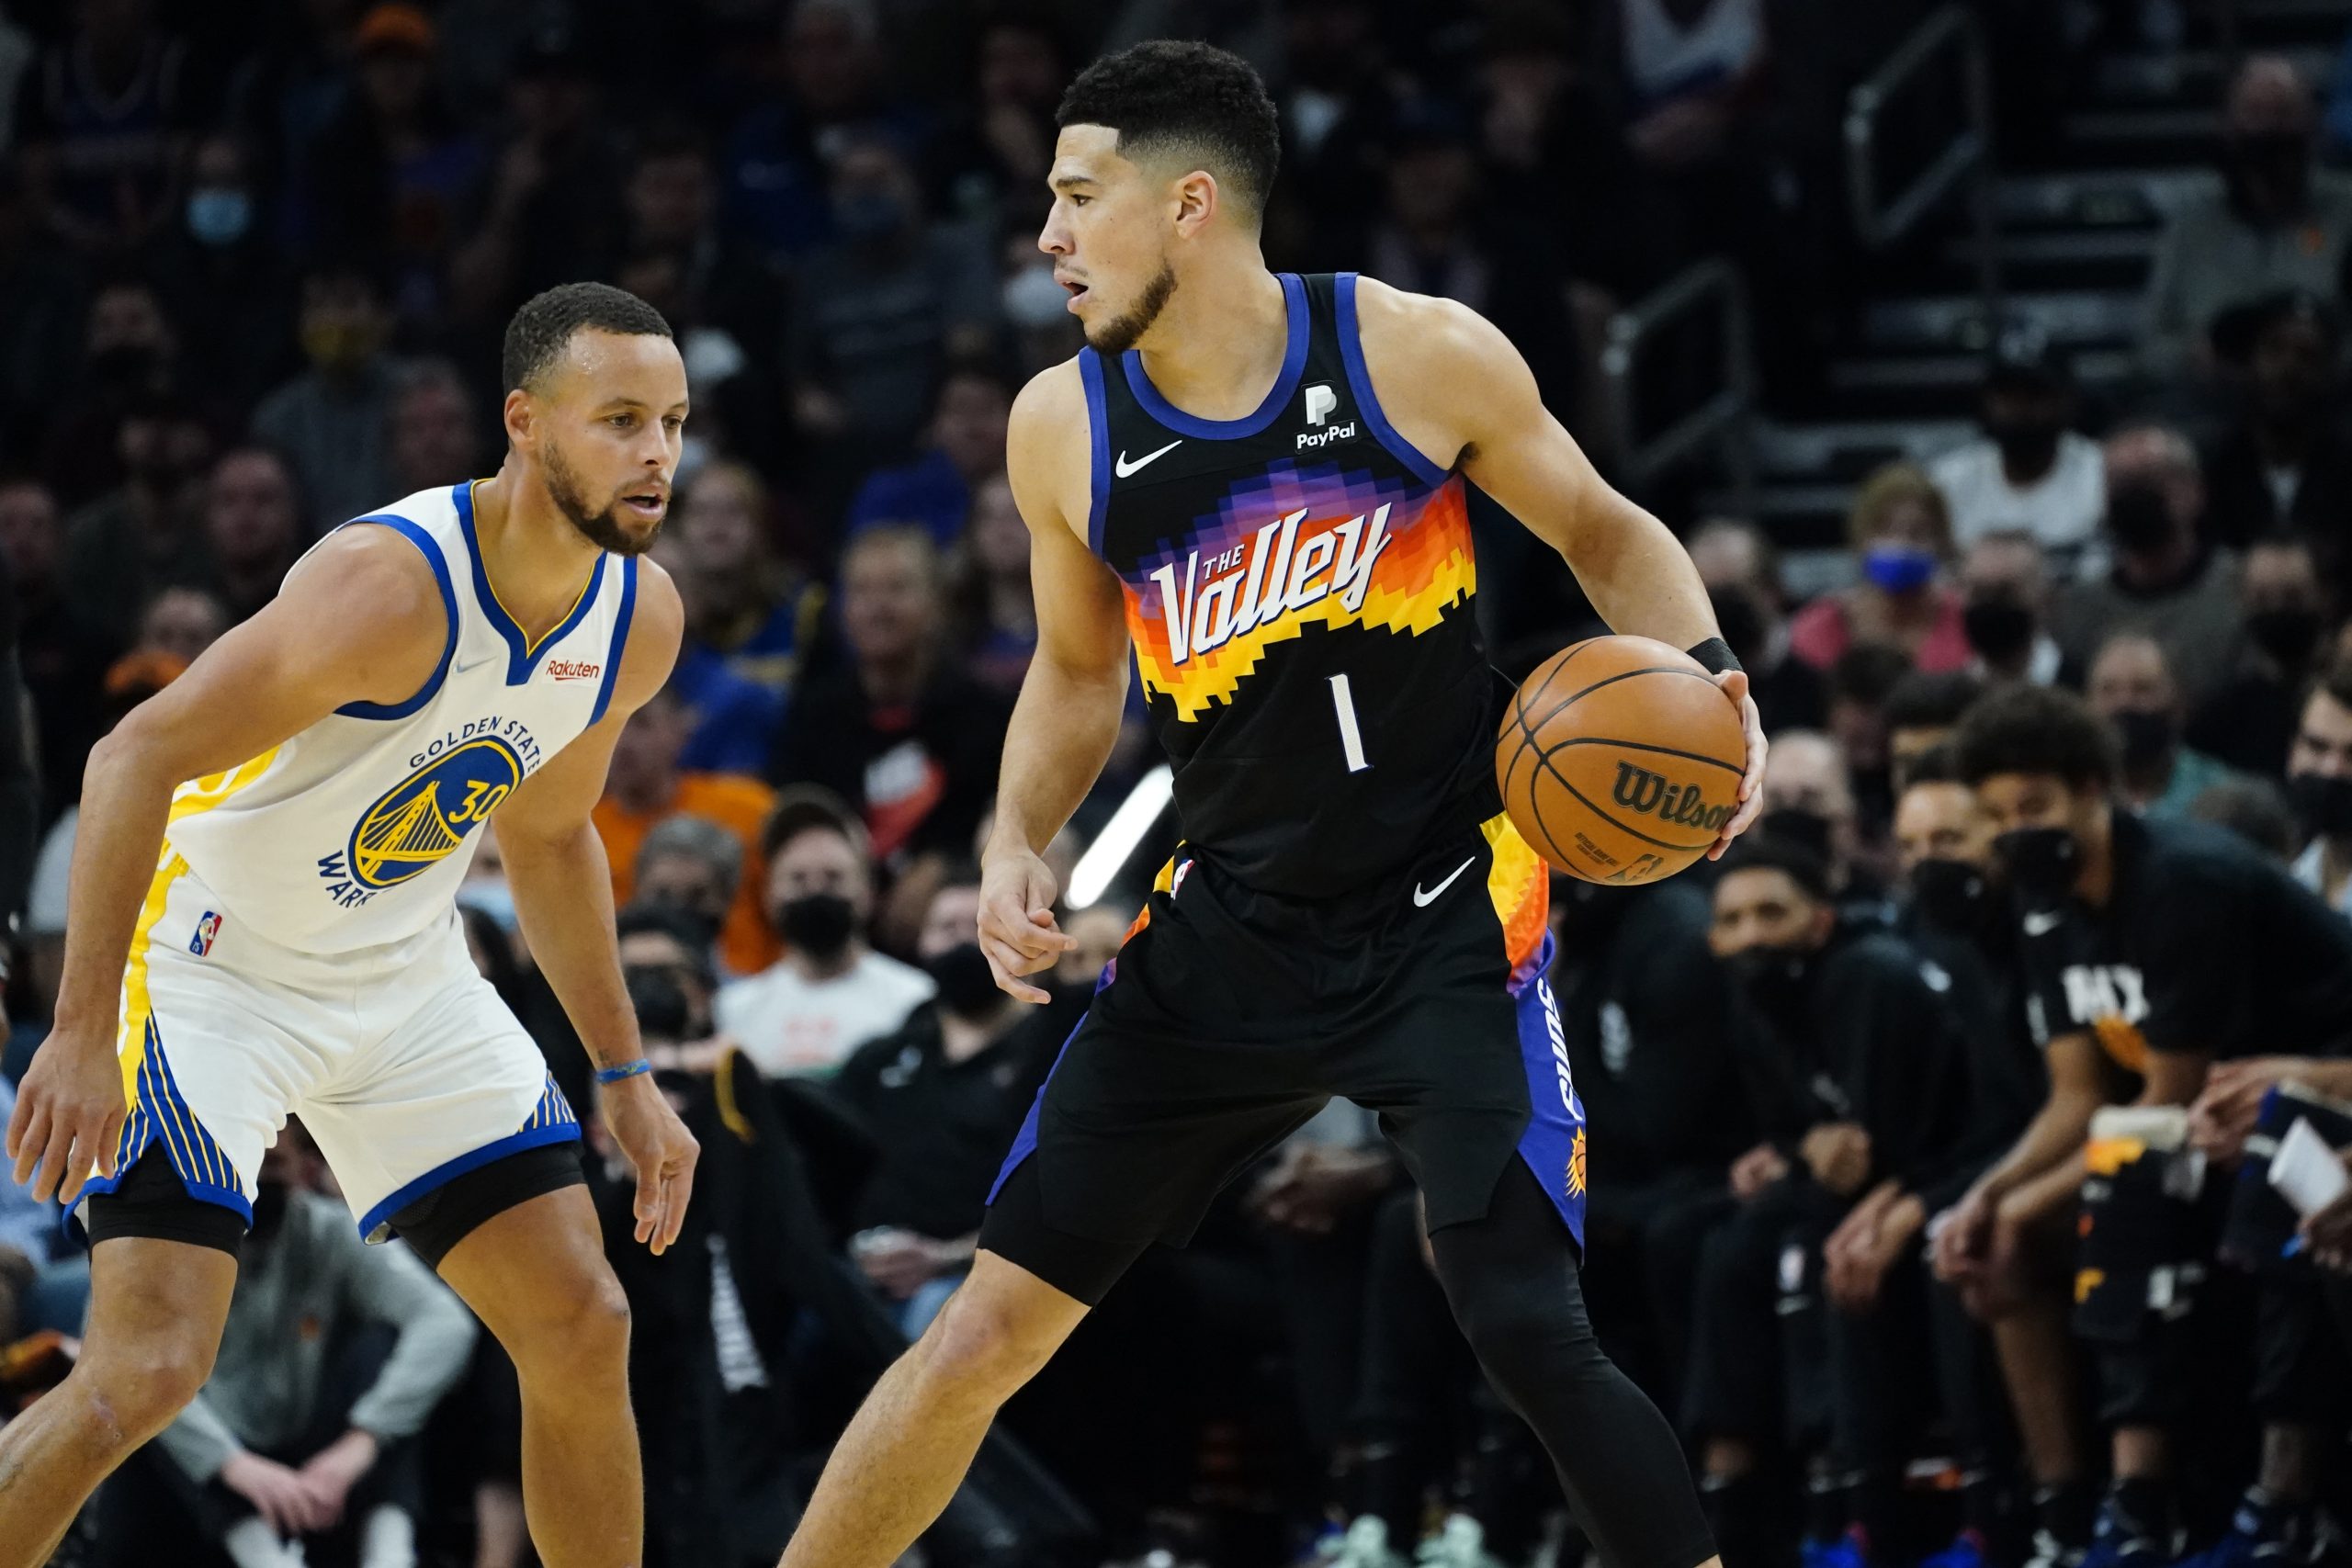 Phoenix Suns guard Devin Booker (1) defended by Golden State Warriors guard Stephen Curry (30) during the first half of an NBA basketball game, Tuesday, Nov. 30, 2021, in Phoenix. (AP Photo/Matt York)